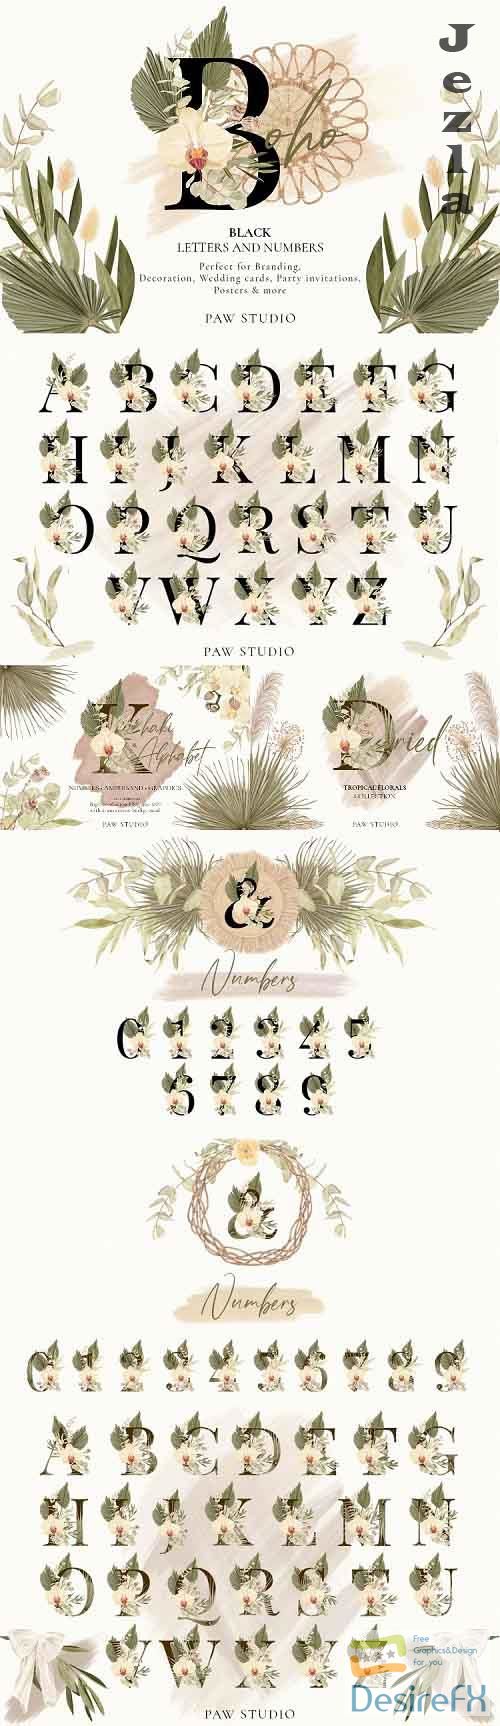 Boho Alphabet Numbers Graphics With Orchid, Dried Leaves - 566233